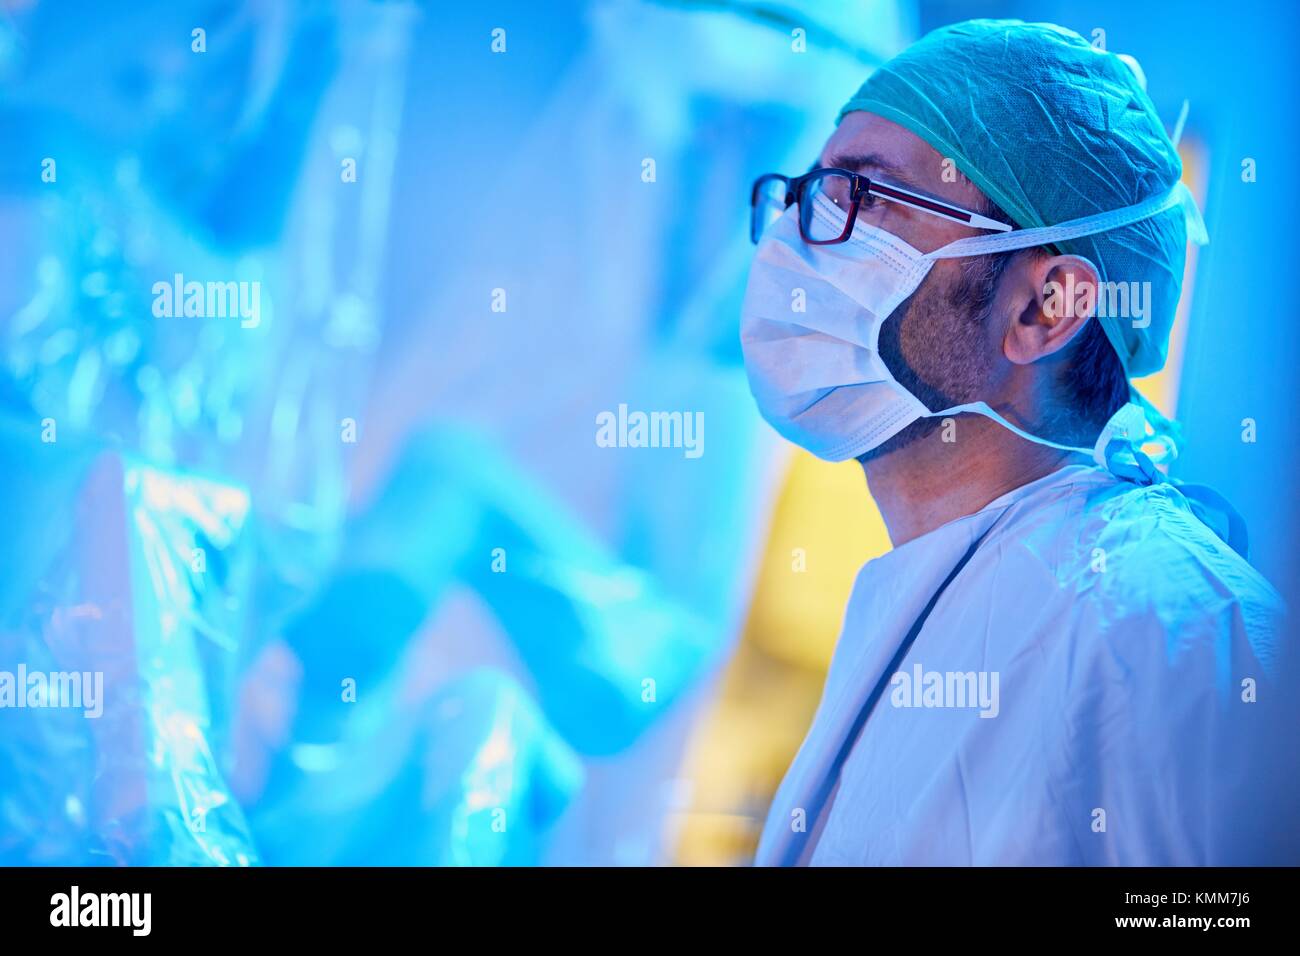 Surgical Treatment of Prostate Cancer, Radical prostatectomy, Da Vinci Surgical Robot, Team of surgeons of doctors Madina & Azparren, Urology, Stock Photo